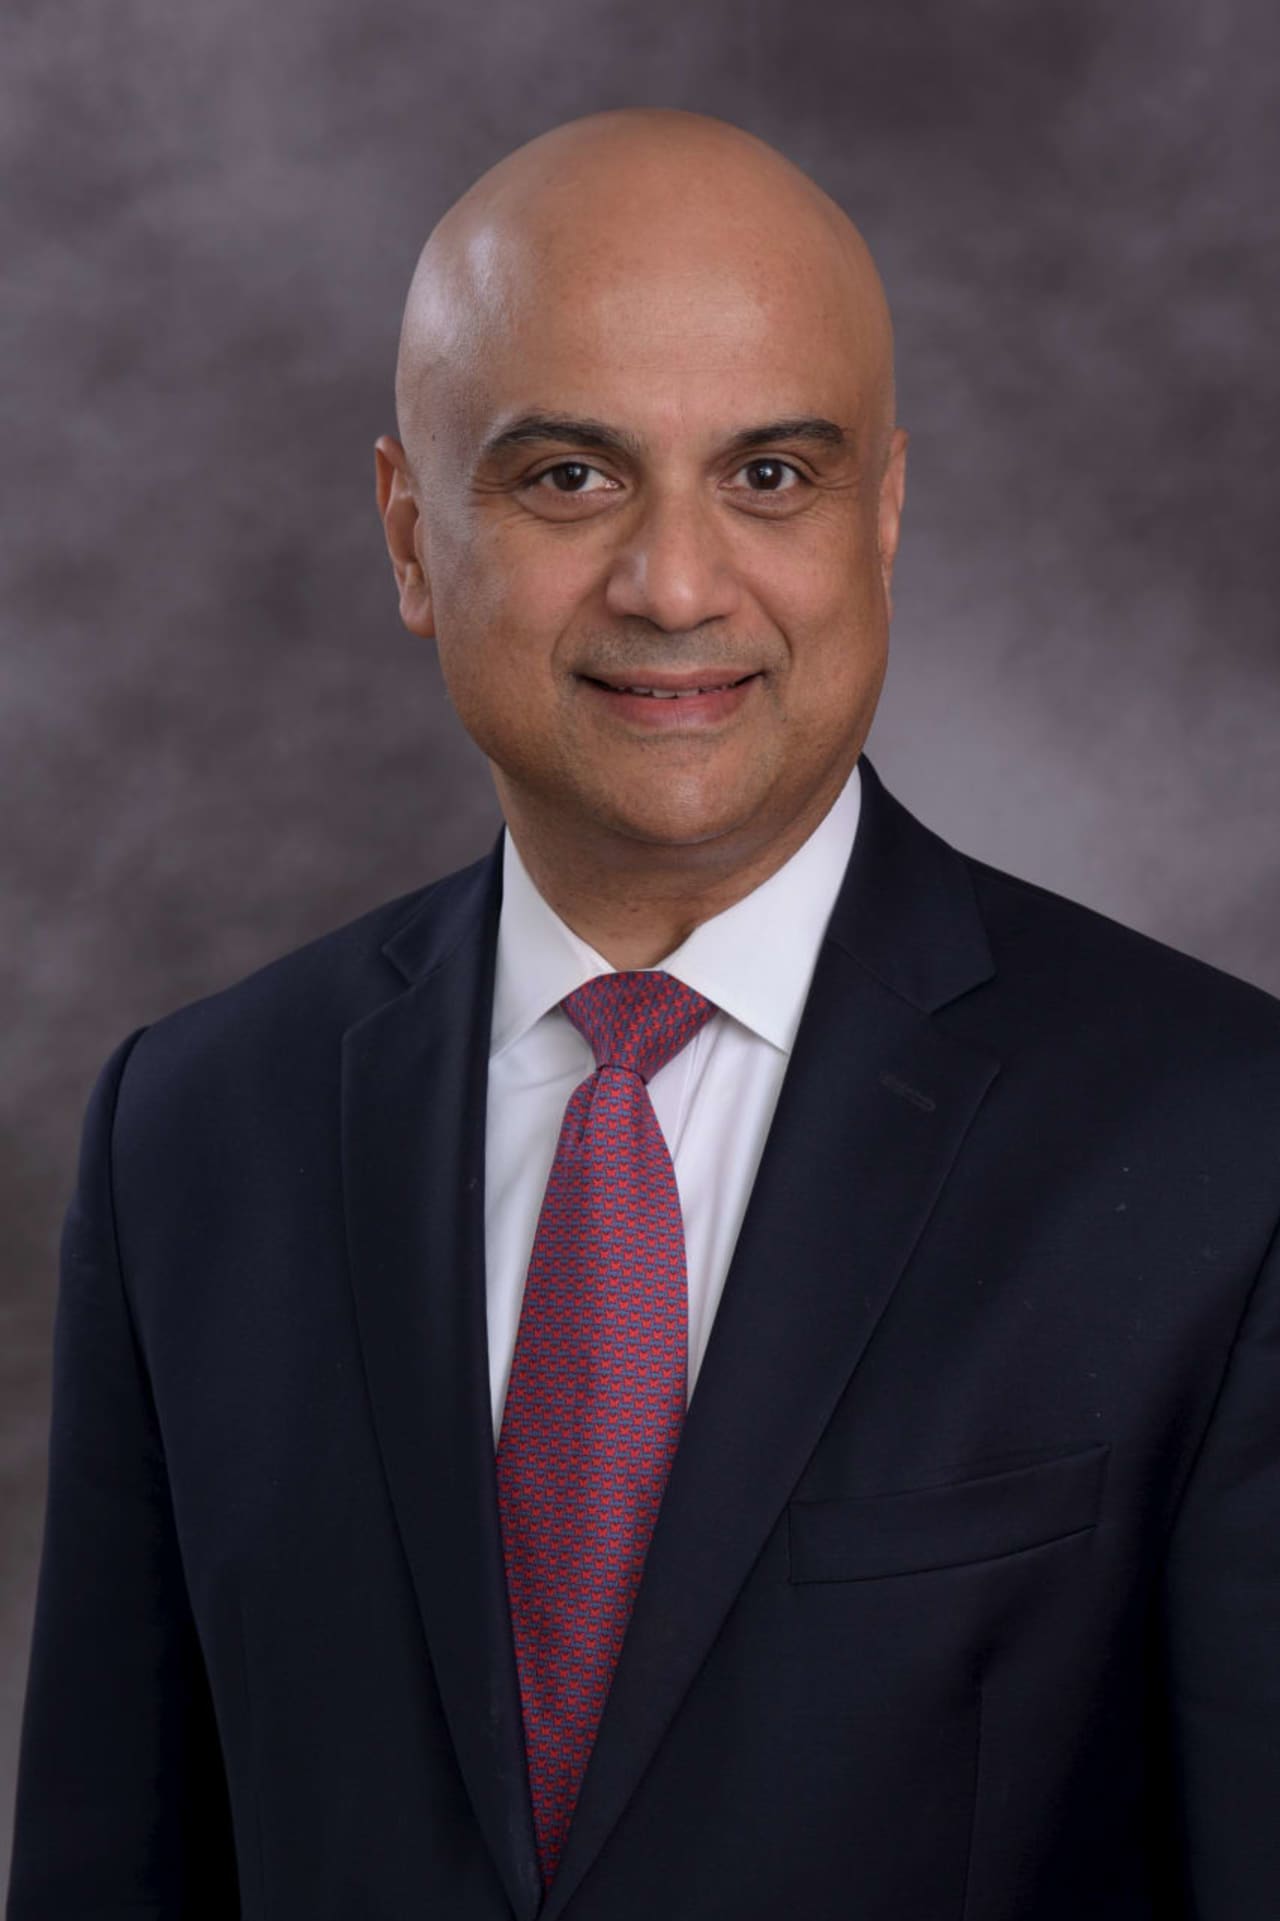 White Plains Hospital has announced Dr. Baljit Singh as the hospital's newest director of pathology. This is the first time the hospital has appointed a new director of pathology in nearly 30 years.